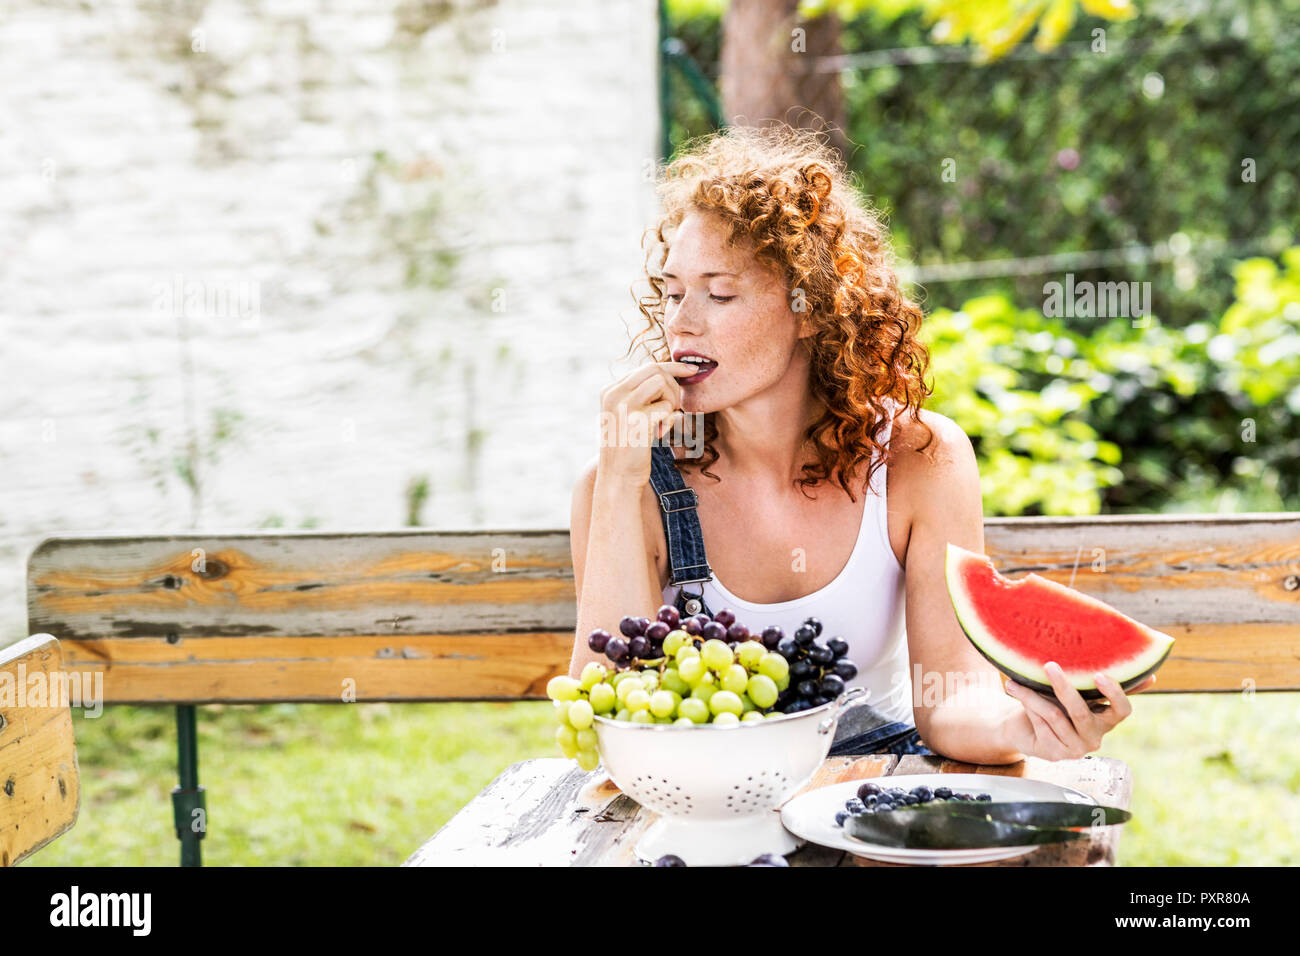 Redheaded young woman eating grapes in summer Stock Photo